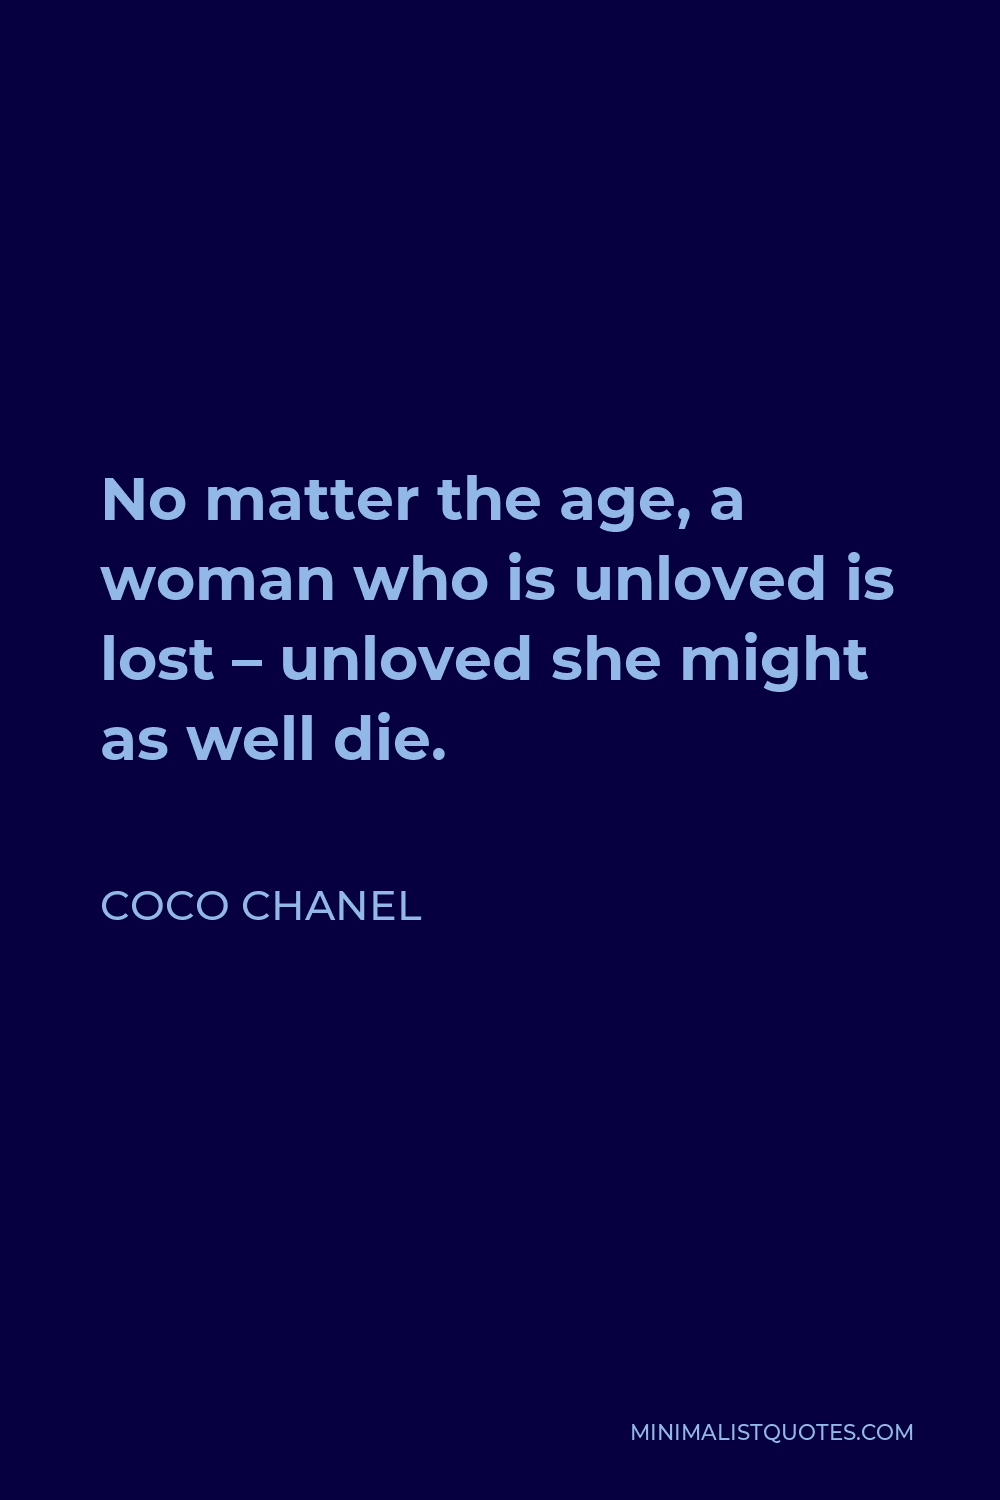 Coco Chanel Quote - No matter the age, a woman who is unloved is lost – unloved she might as well die.